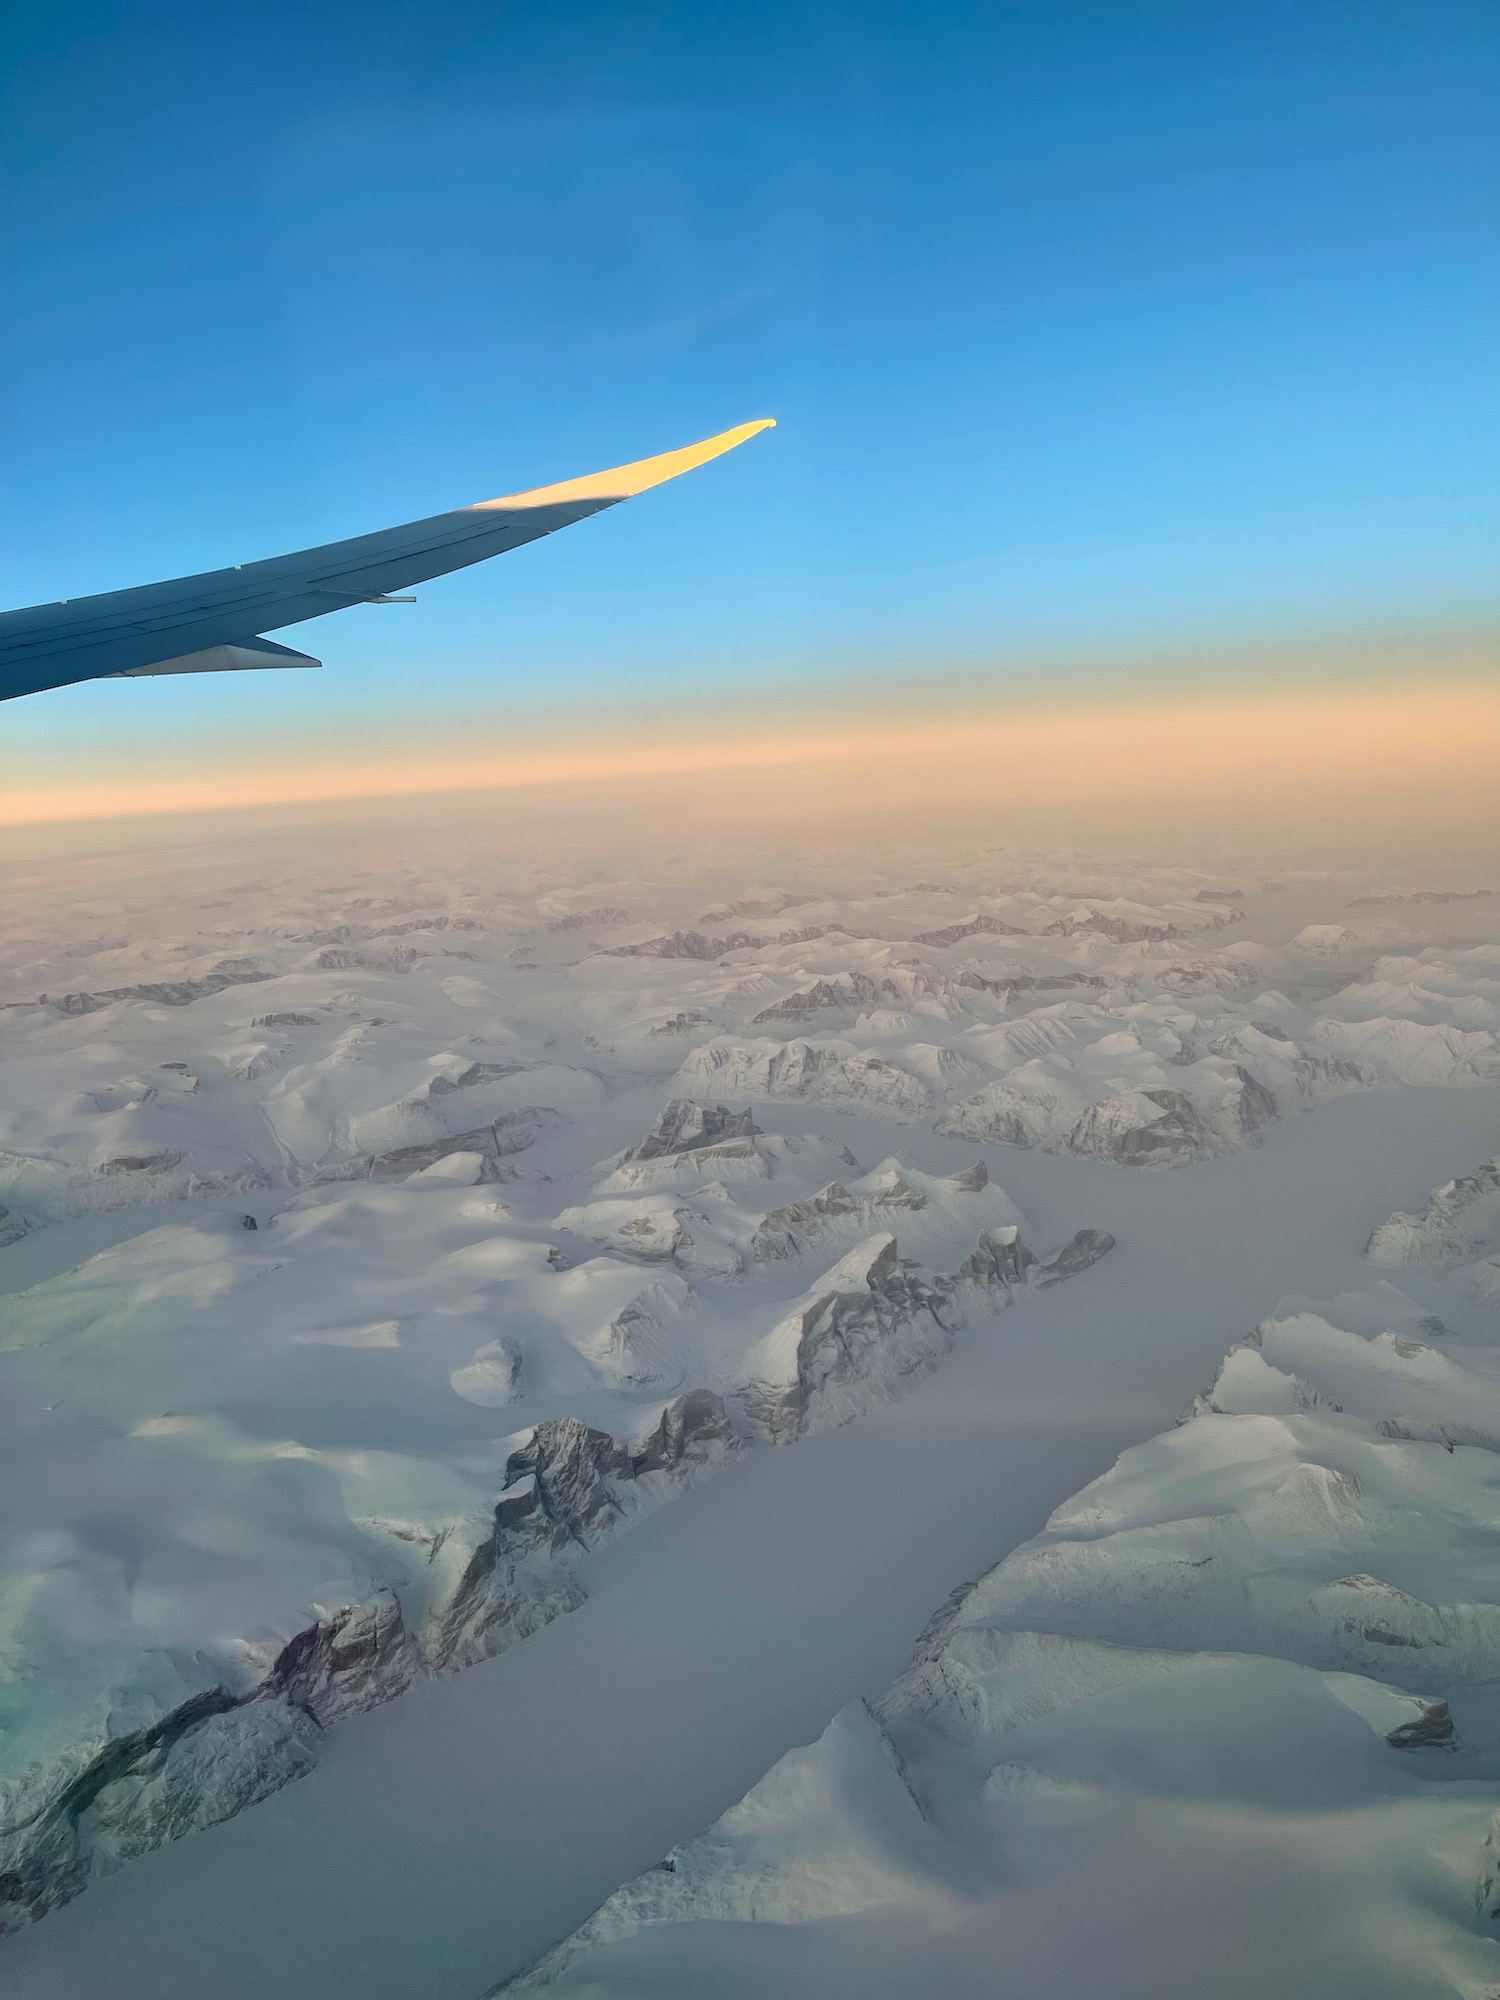 an airplane wing above a snowy landscape